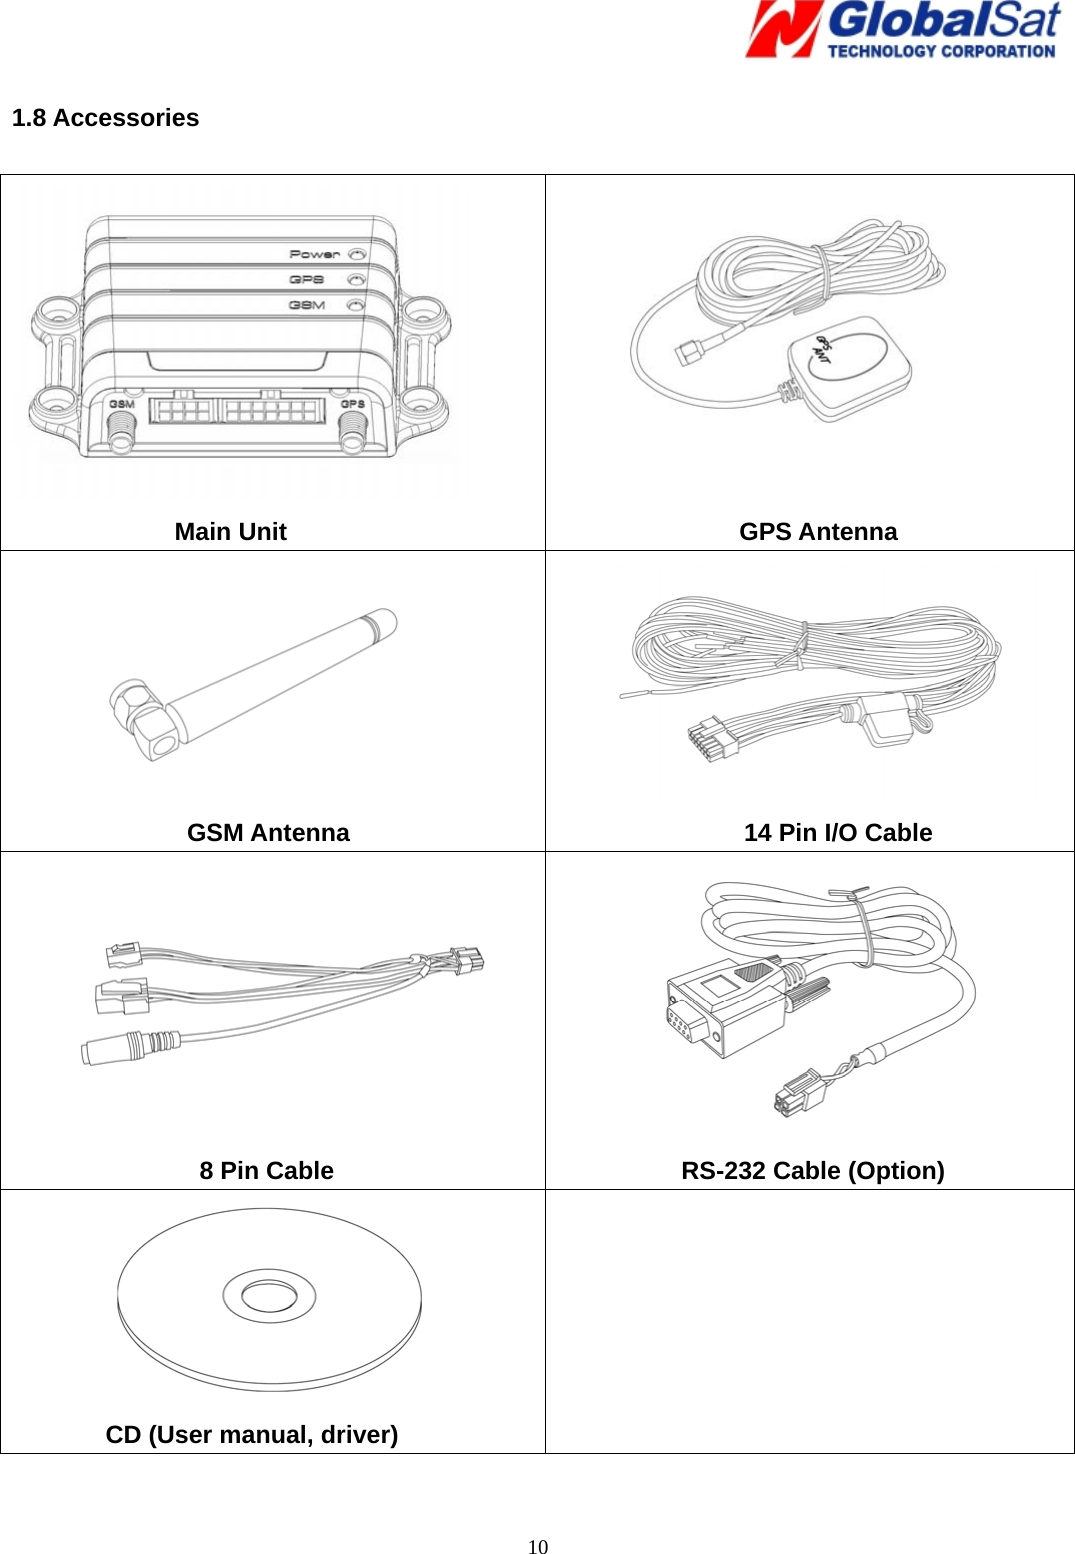   10 1.8 Accessories   Main Unit   GPS Antenna  GSM Antenna 14 Pin I/O Cable                8 Pin Cable  RS-232 Cable (Option)  CD (User manual, driver)   